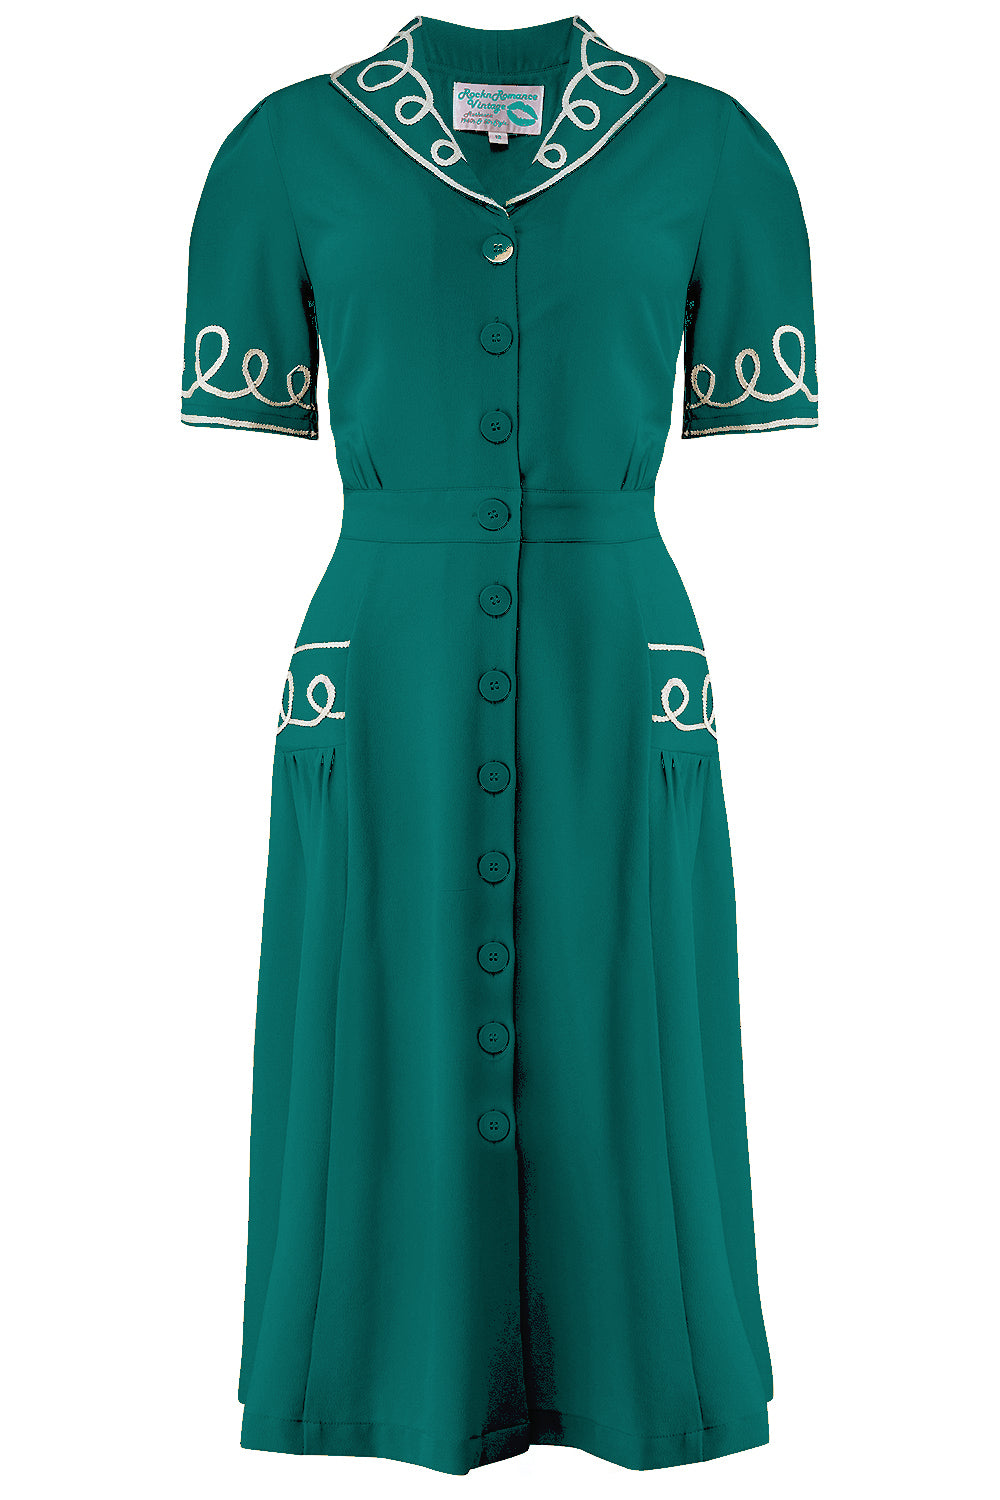 1940s Dresses | 40s Dress, Swing Dress, Tea Dresses The Loopy-Lou Shirtwaister Dress in Teal with Contrast RicRac True 1950s Vintage Style £49.95 AT vintagedancer.com